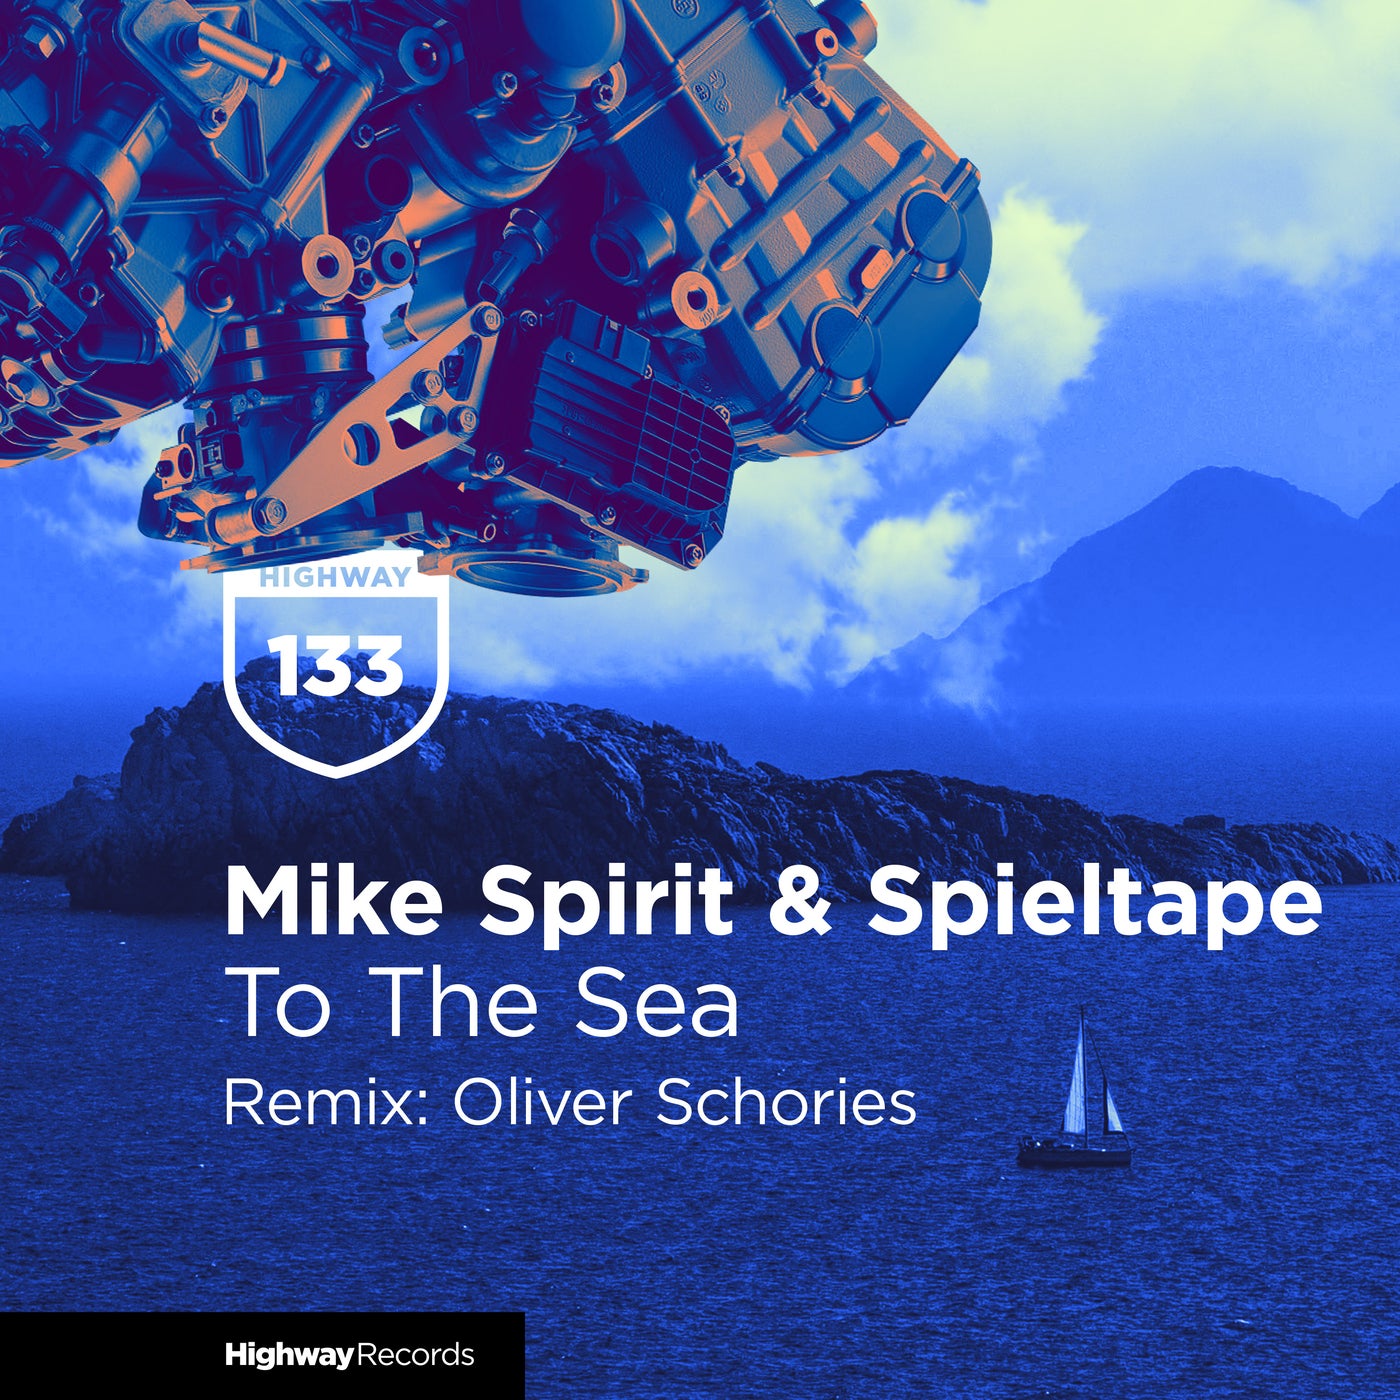 Download To The Sea (Oliver Schories Remix) on Electrobuzz